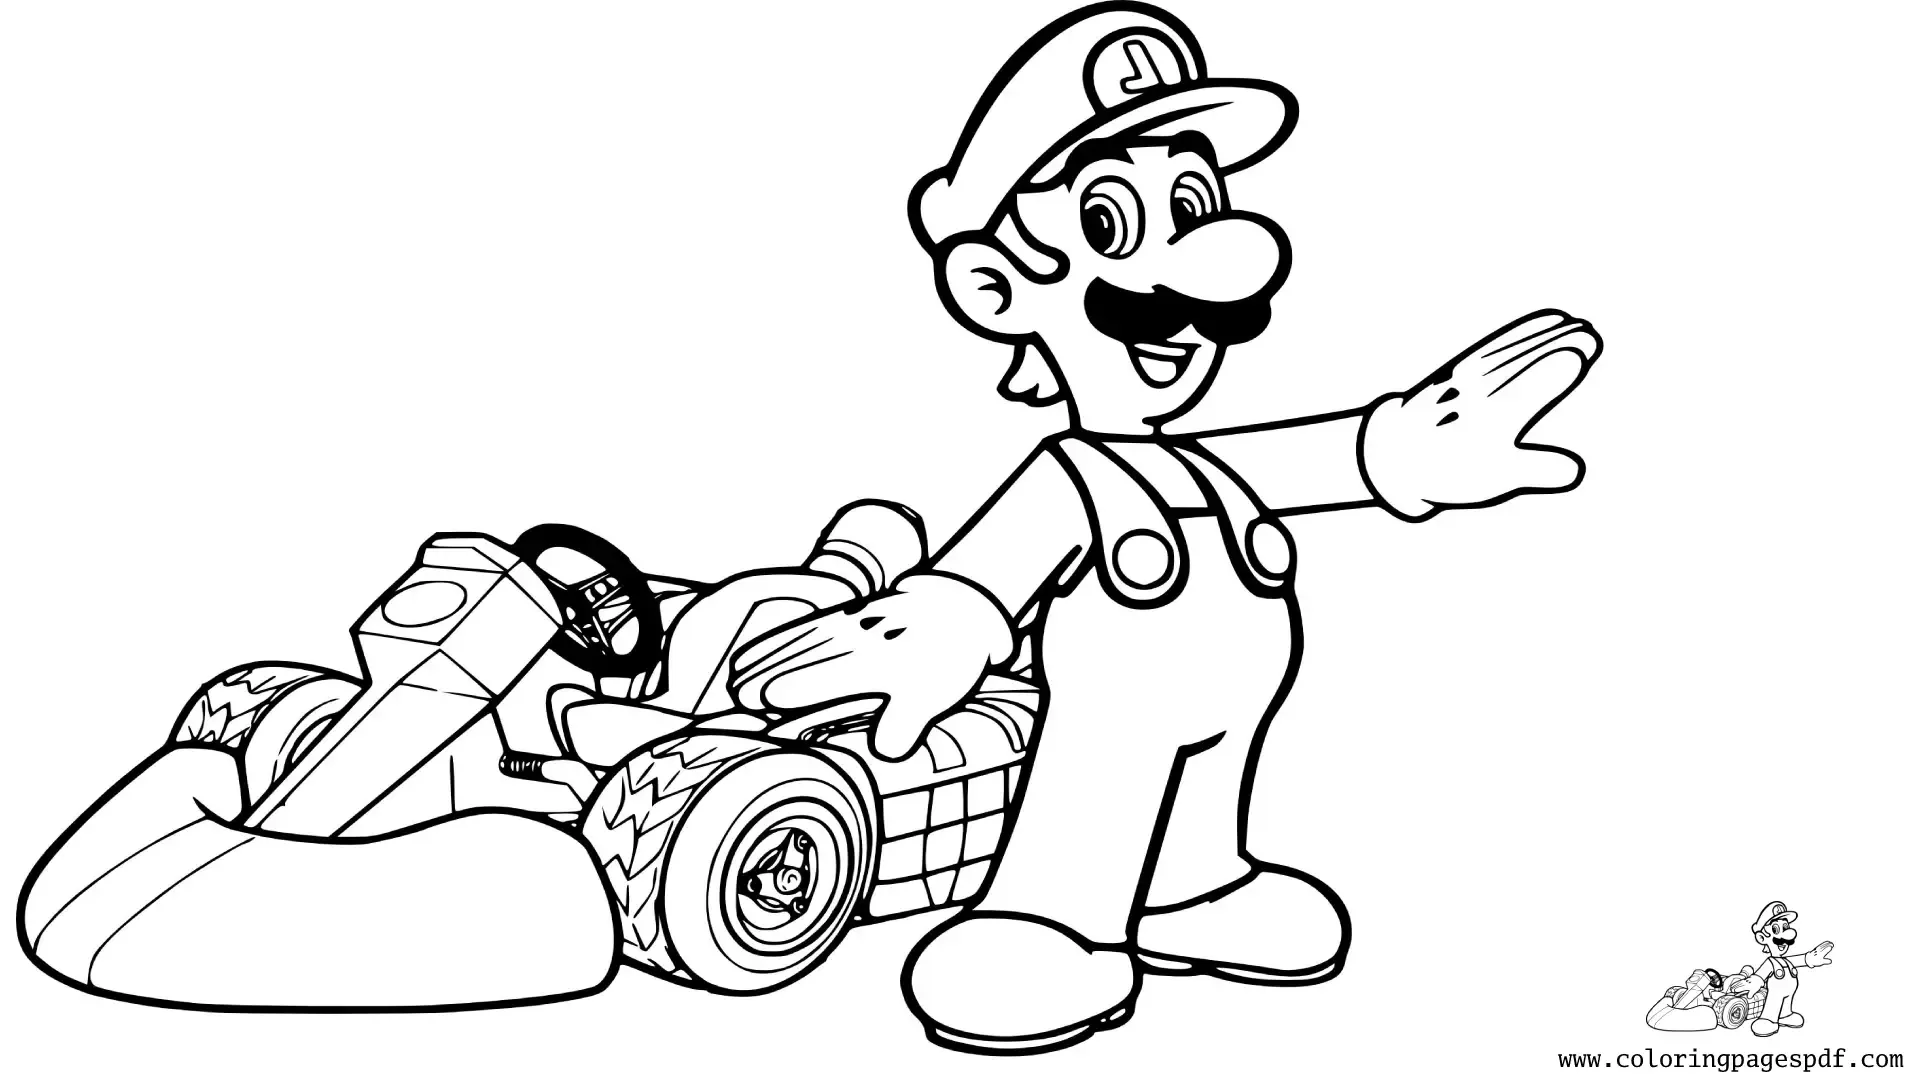 Coloring Page Of Luigi With His Kart